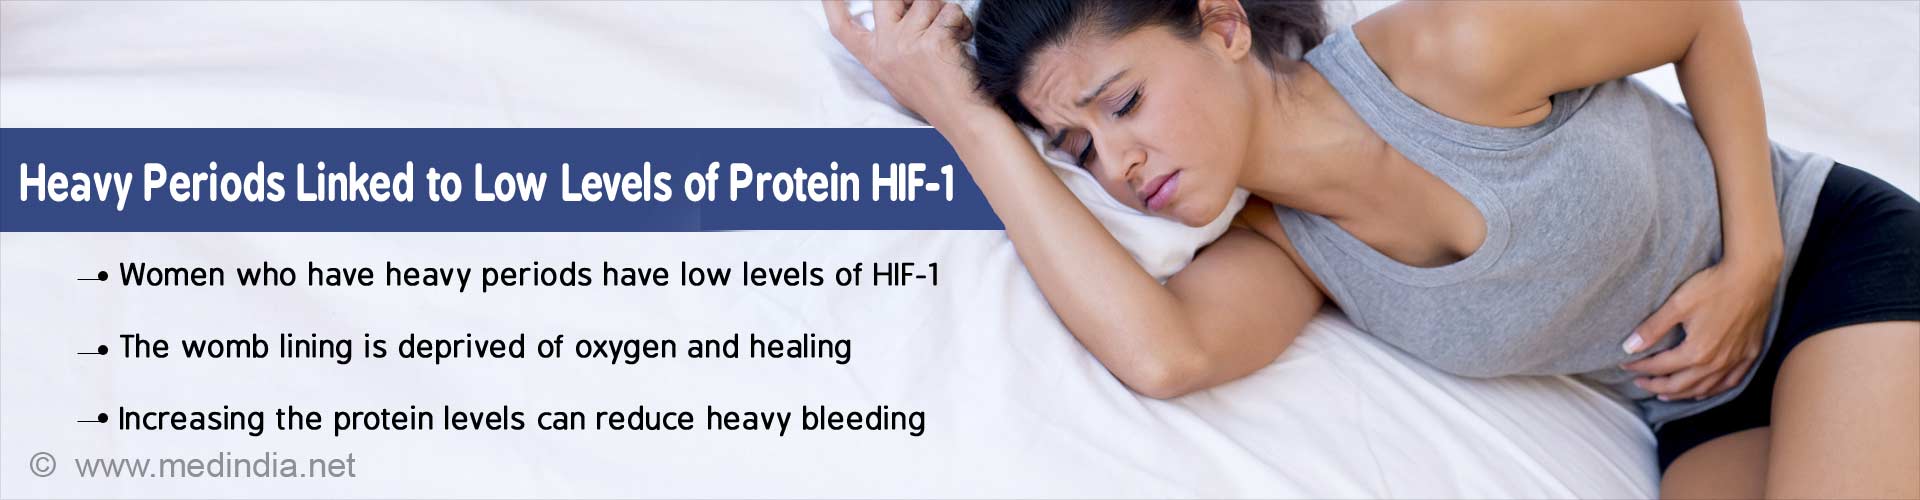 heavy periods linked to low levels of protein HIF-1
- women who have heavy periods have low levels of HIG-1
- the lining is deprived of oxygen and healing
- increasing the protein levels can reduce heavy bleeding